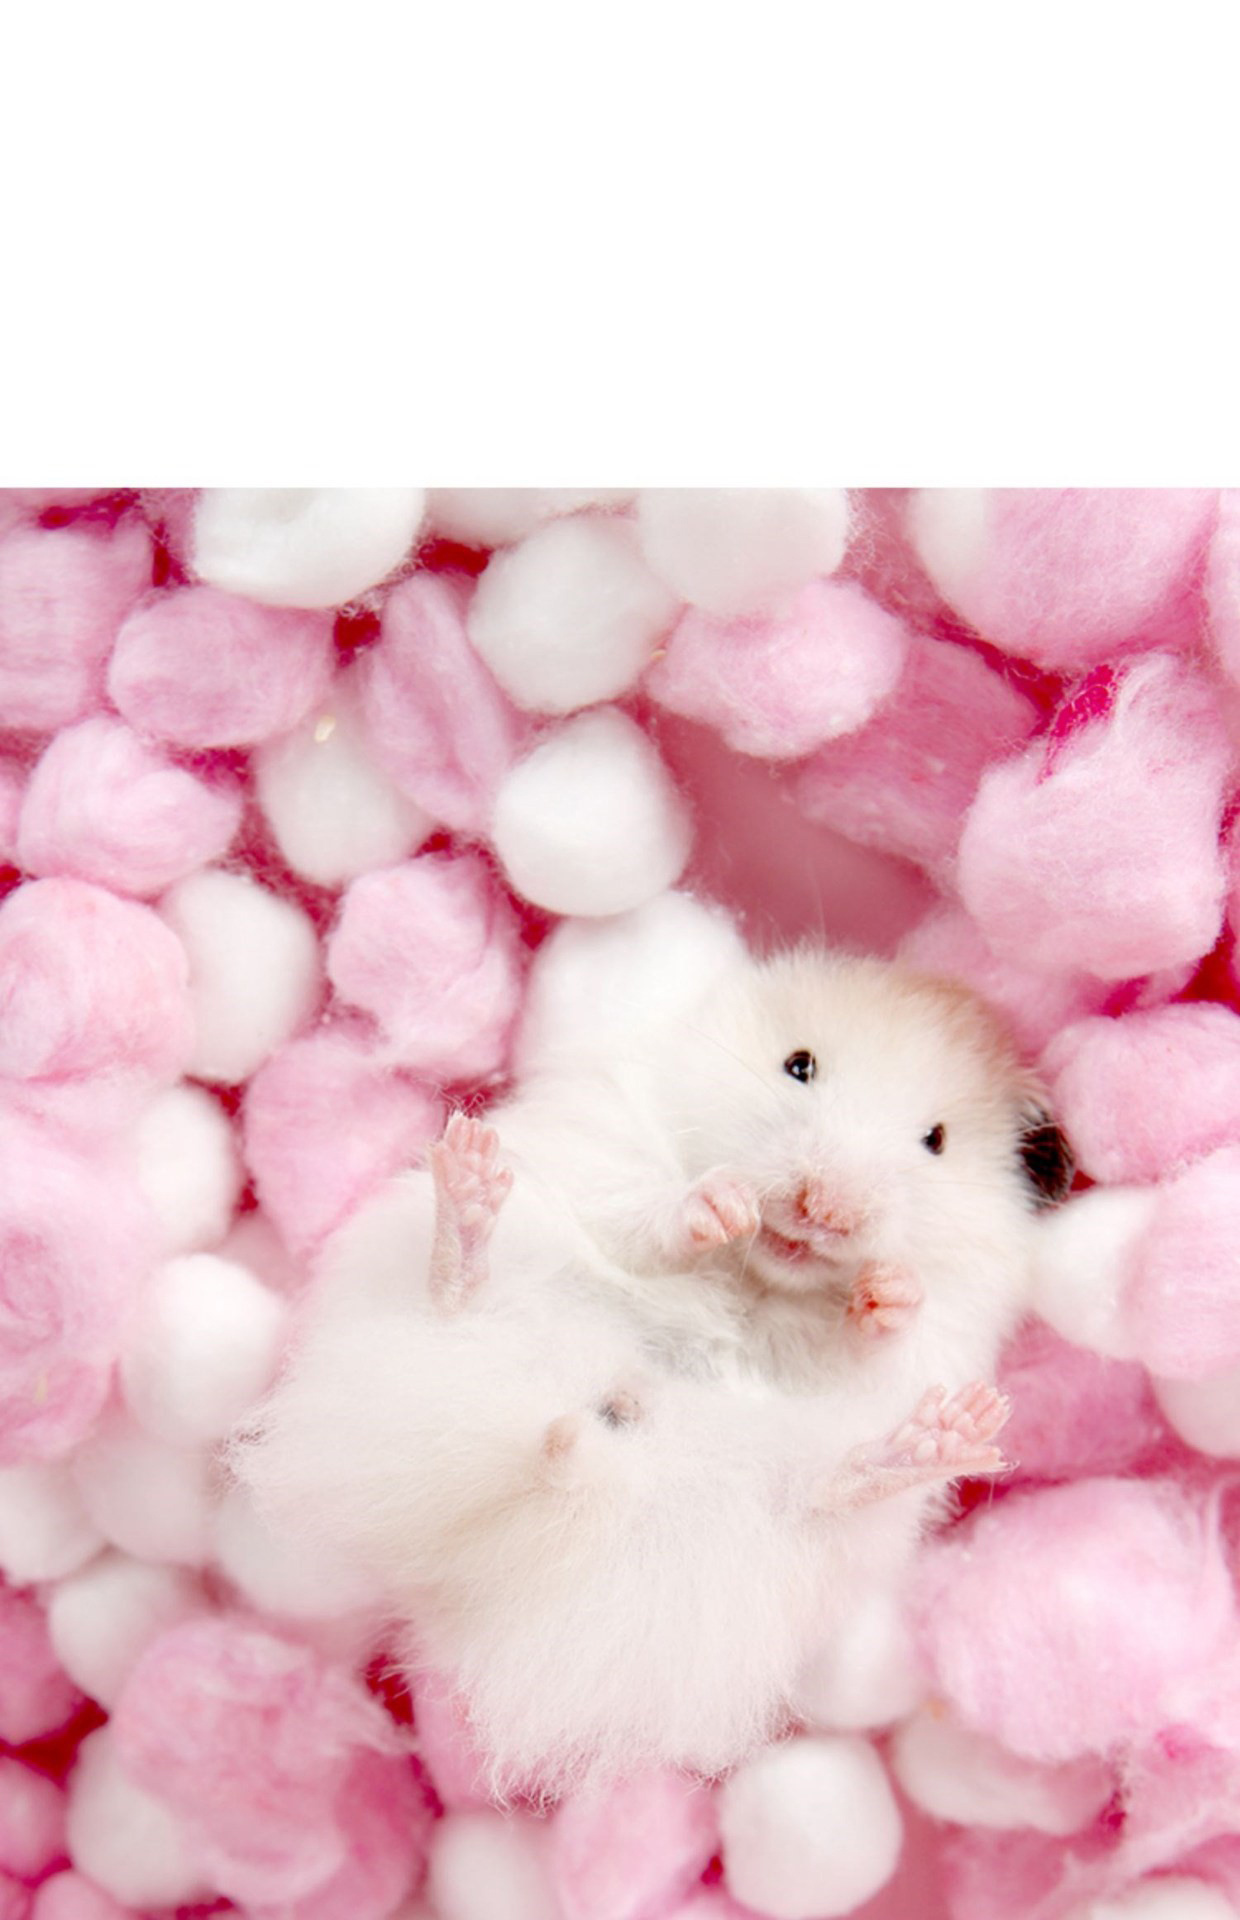 Hamster Cotton Warm Balls, Soft Safe Colorful Cotton Balls Filler Clean For  Small Animals